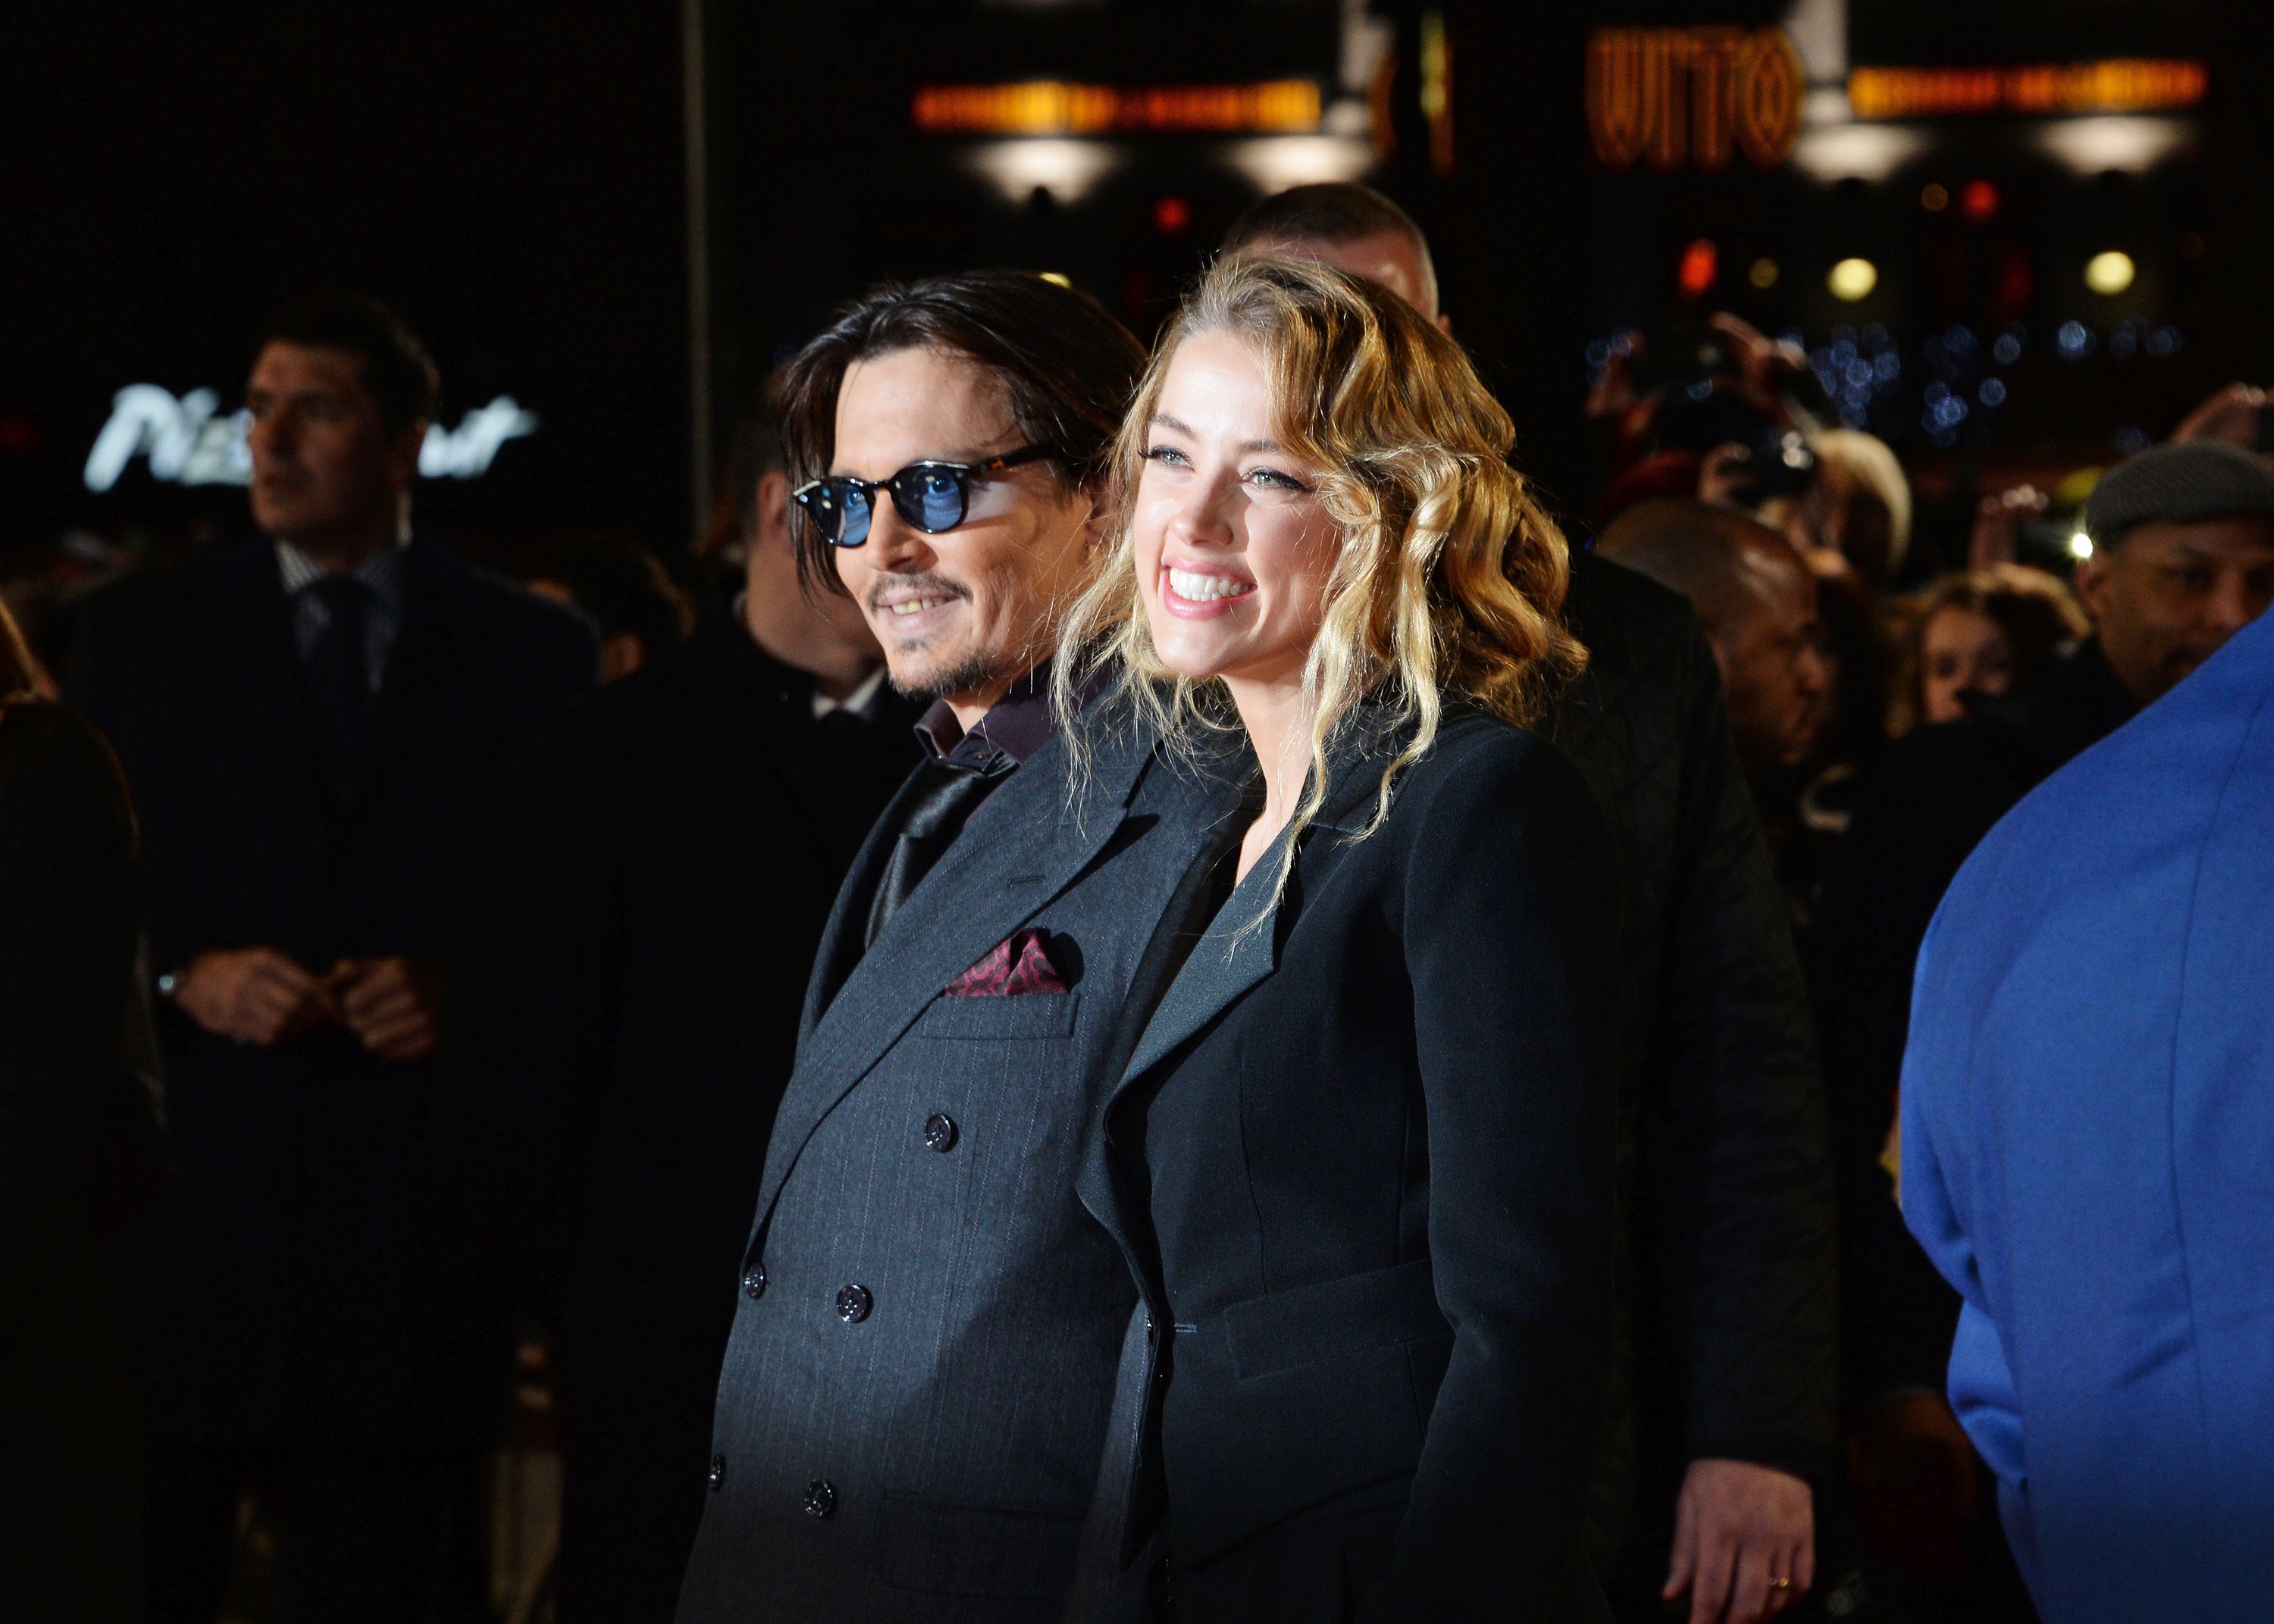 Johnny Depp and Amber Heard during the UK Premiere of "Mortdecai" at Empire Leicester Square on January 19, 2015, in London, England. | Source: Getty Images